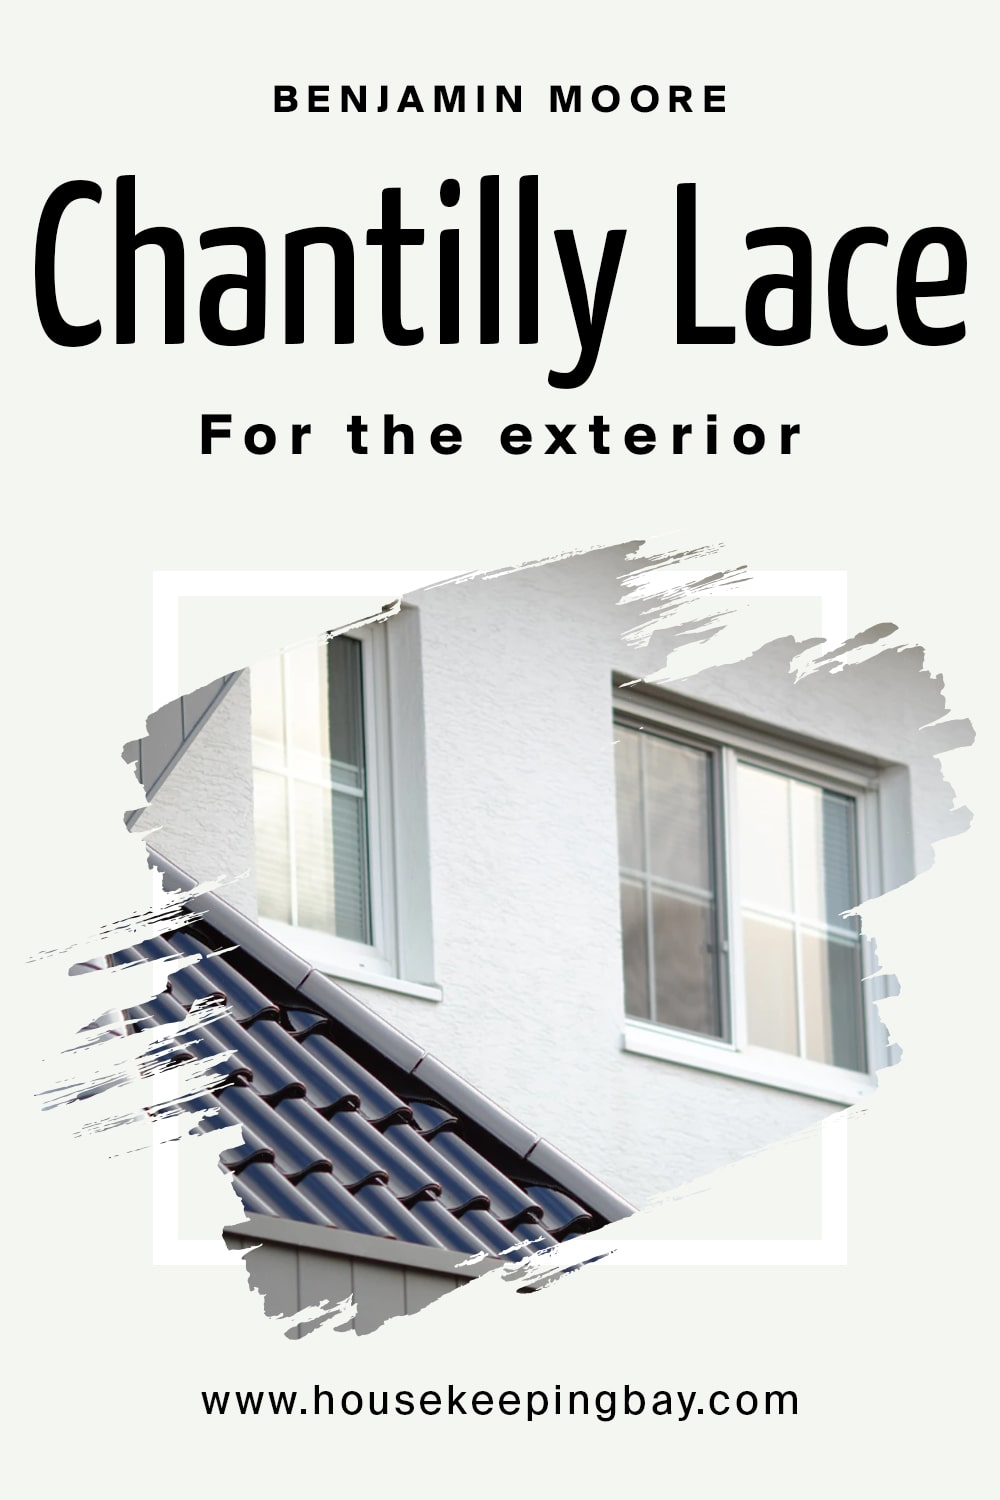 Benjamin Moore. Chantilly Lace For the exterior